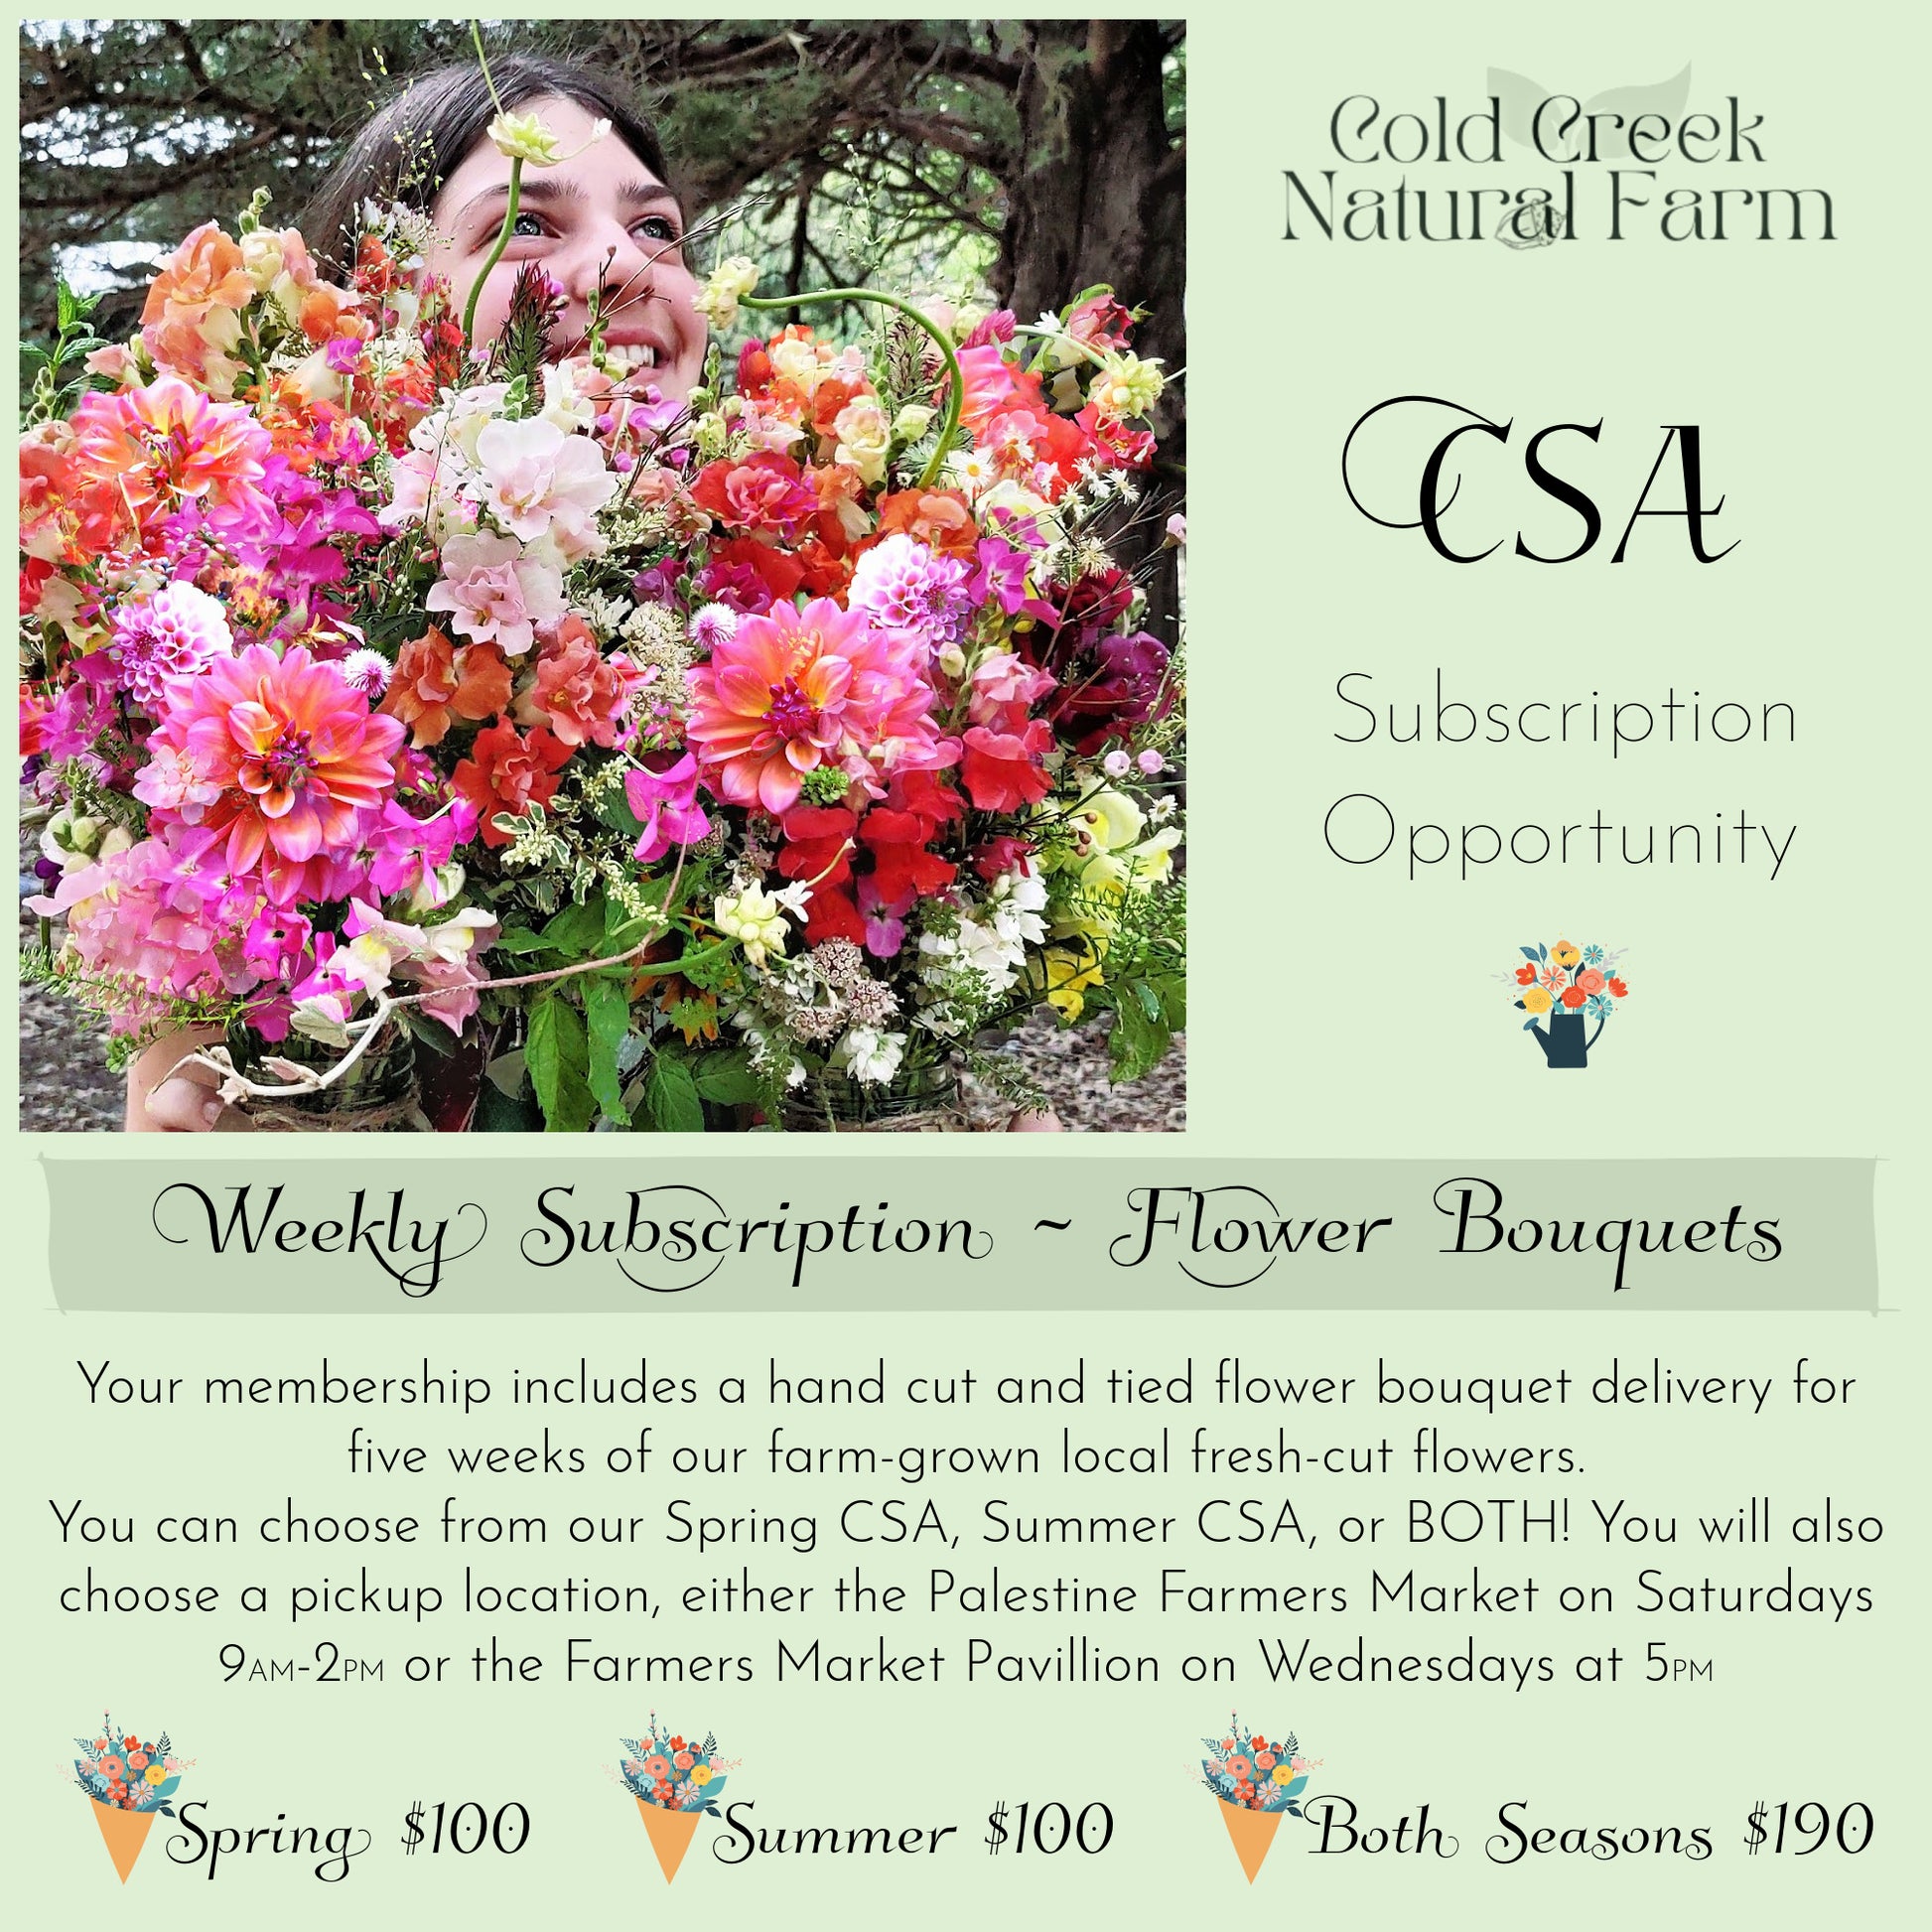 CSA Weekly Flower Subscription - Large Hand Tied Bouquet - Cold Creek Natural Farm